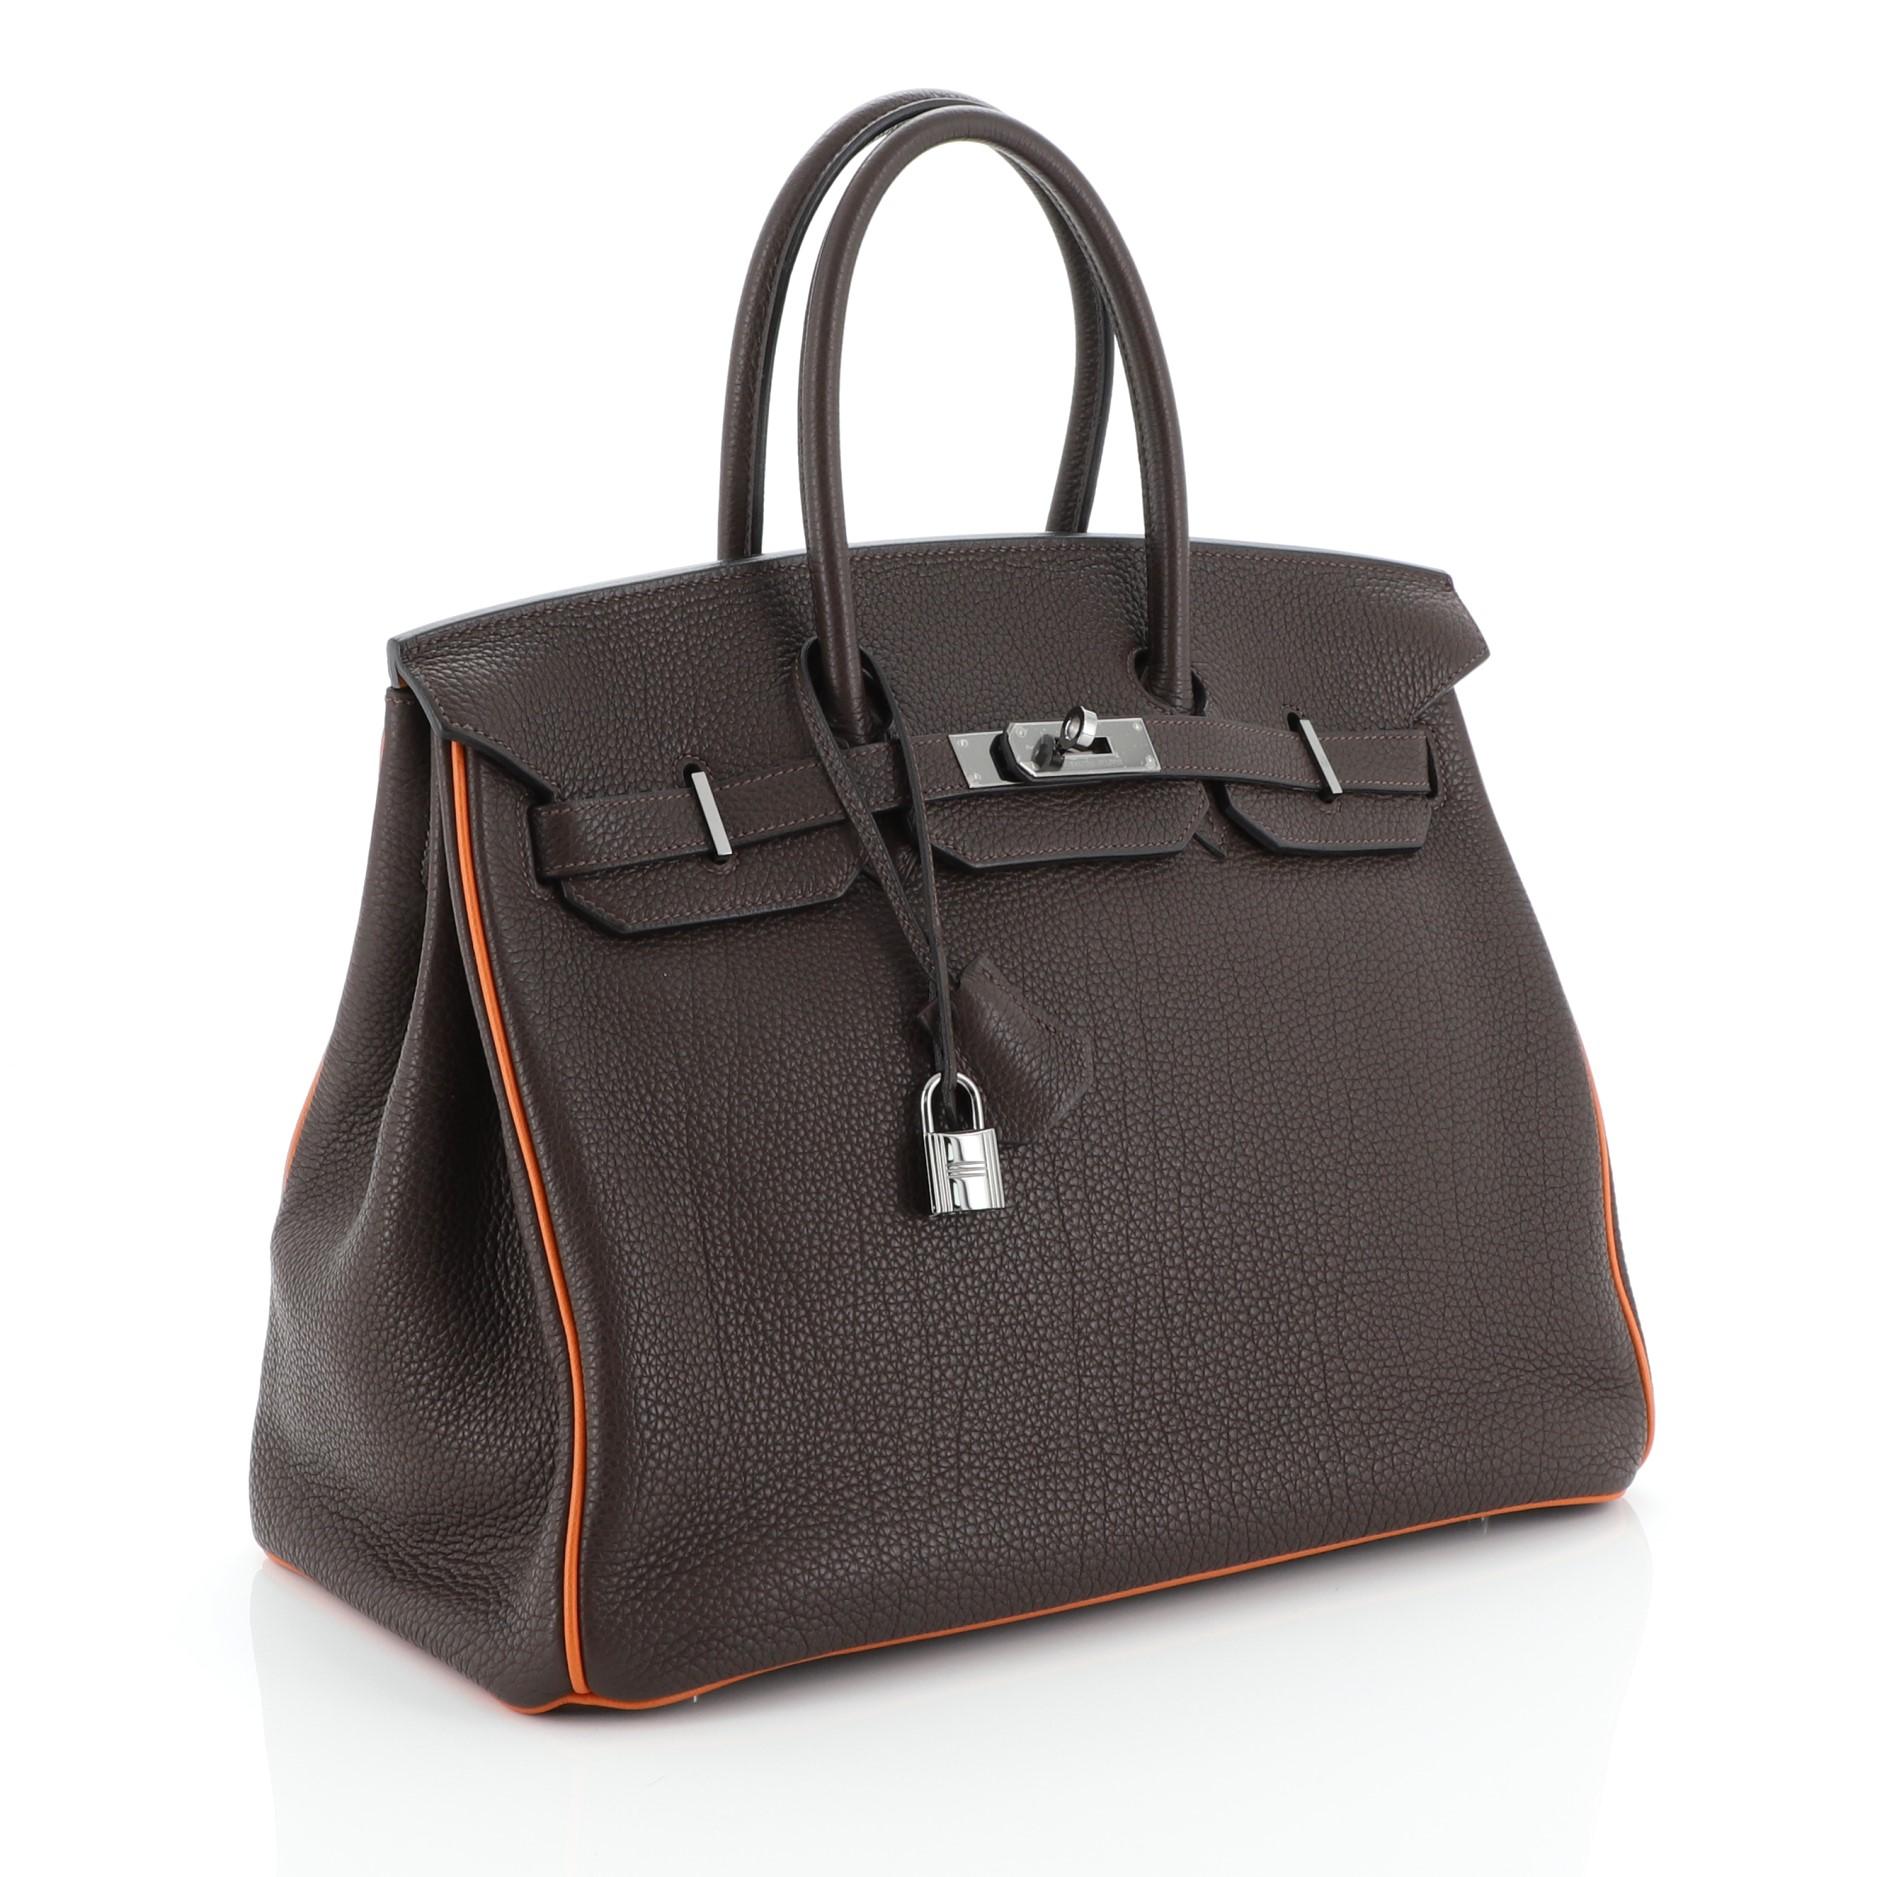 This Hermes Birkin Handbag Bicolor Togo with Ruthenium Hardware 35 is truly a classic piece, named after actress and singer Jane Birkin. Crafted in Chocolate brown Togo leather, this handbag features dual rolled top handles, frontal flap, and